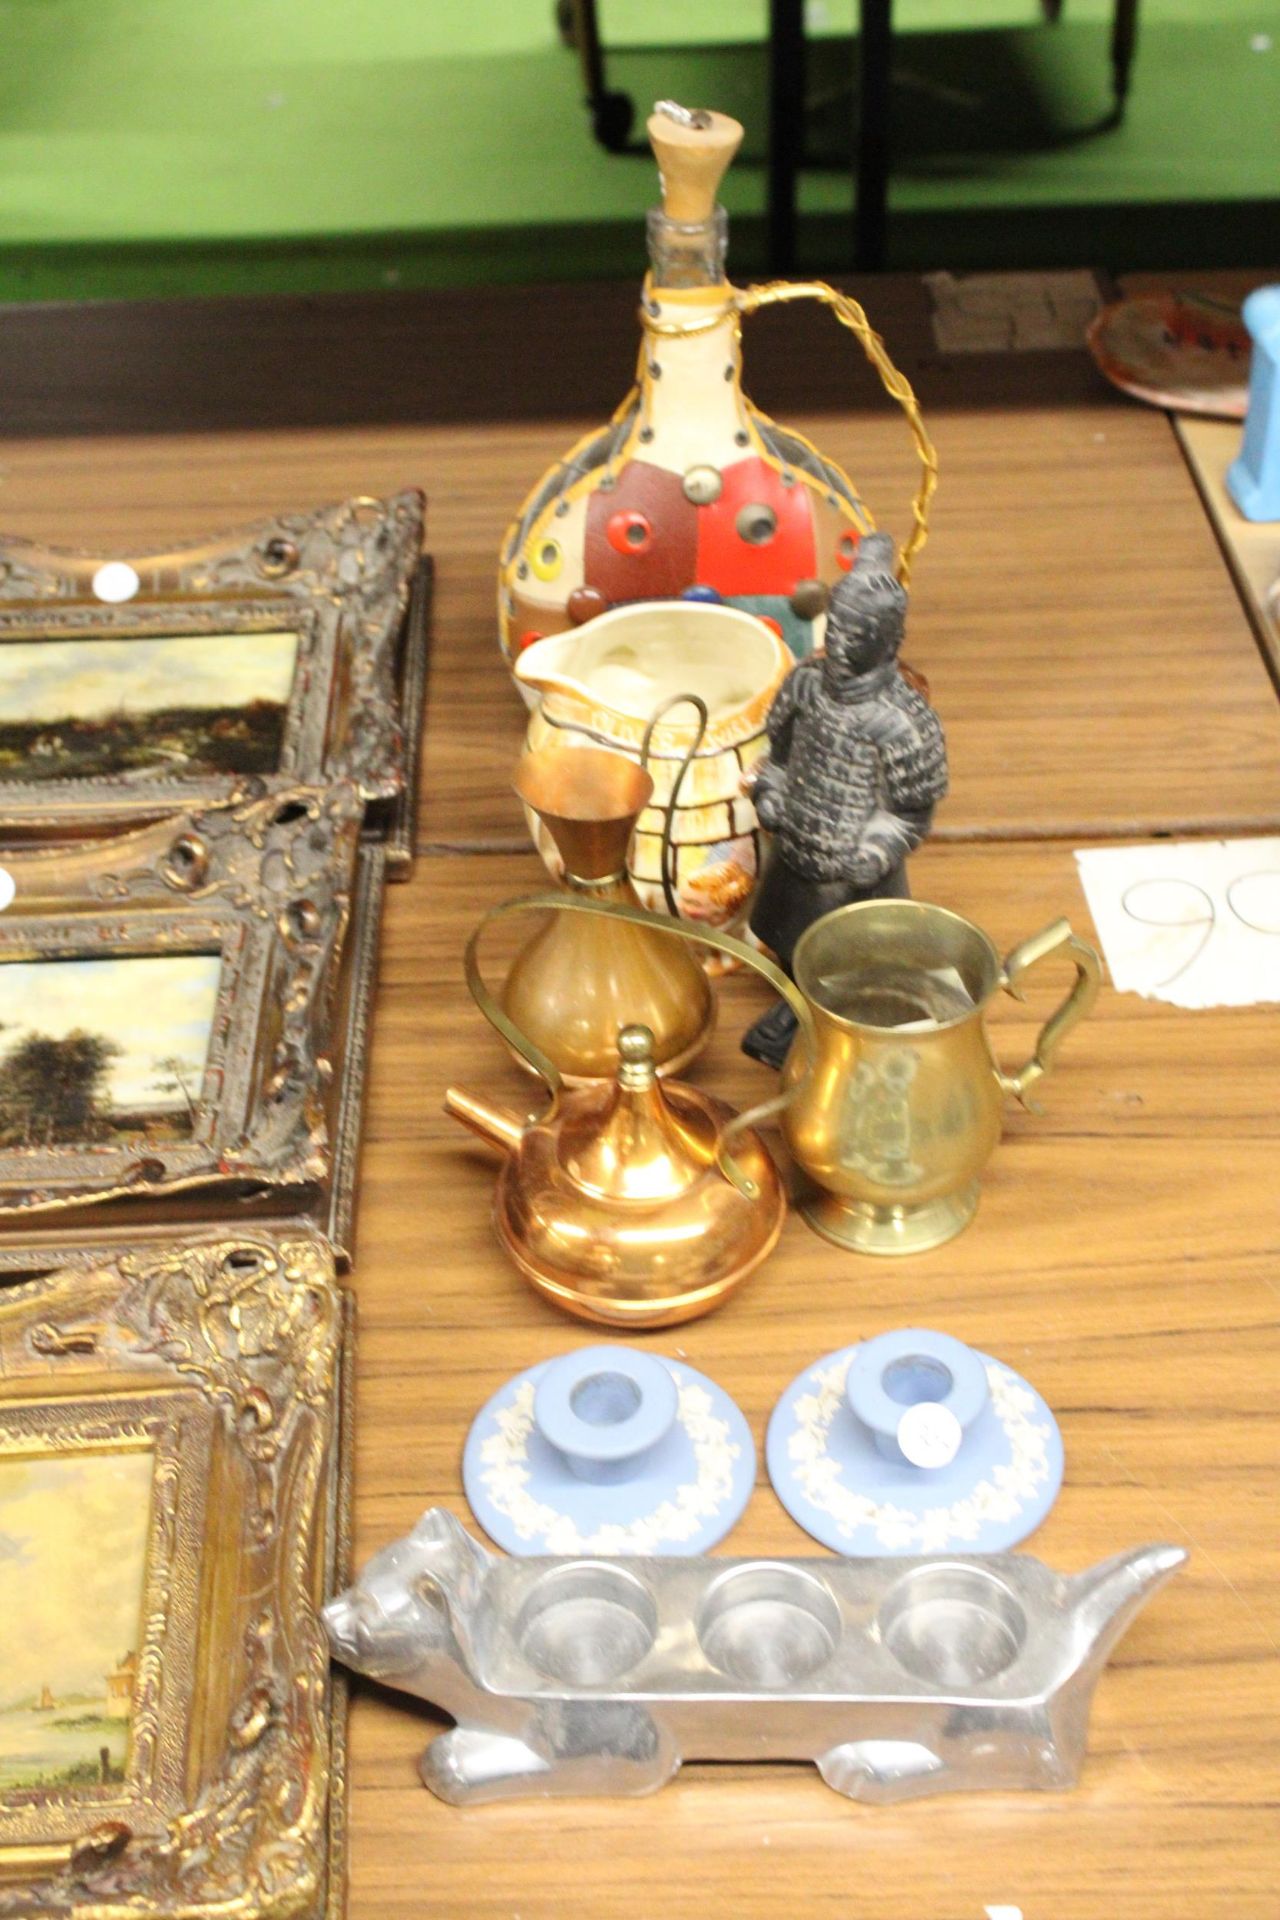 A MIXED LOT TO INCLUDE WEDGWOOD JASPERWARE CANDLESTICKS, COPPER AND BRASS, A WARRIOR FIGURE, WINE